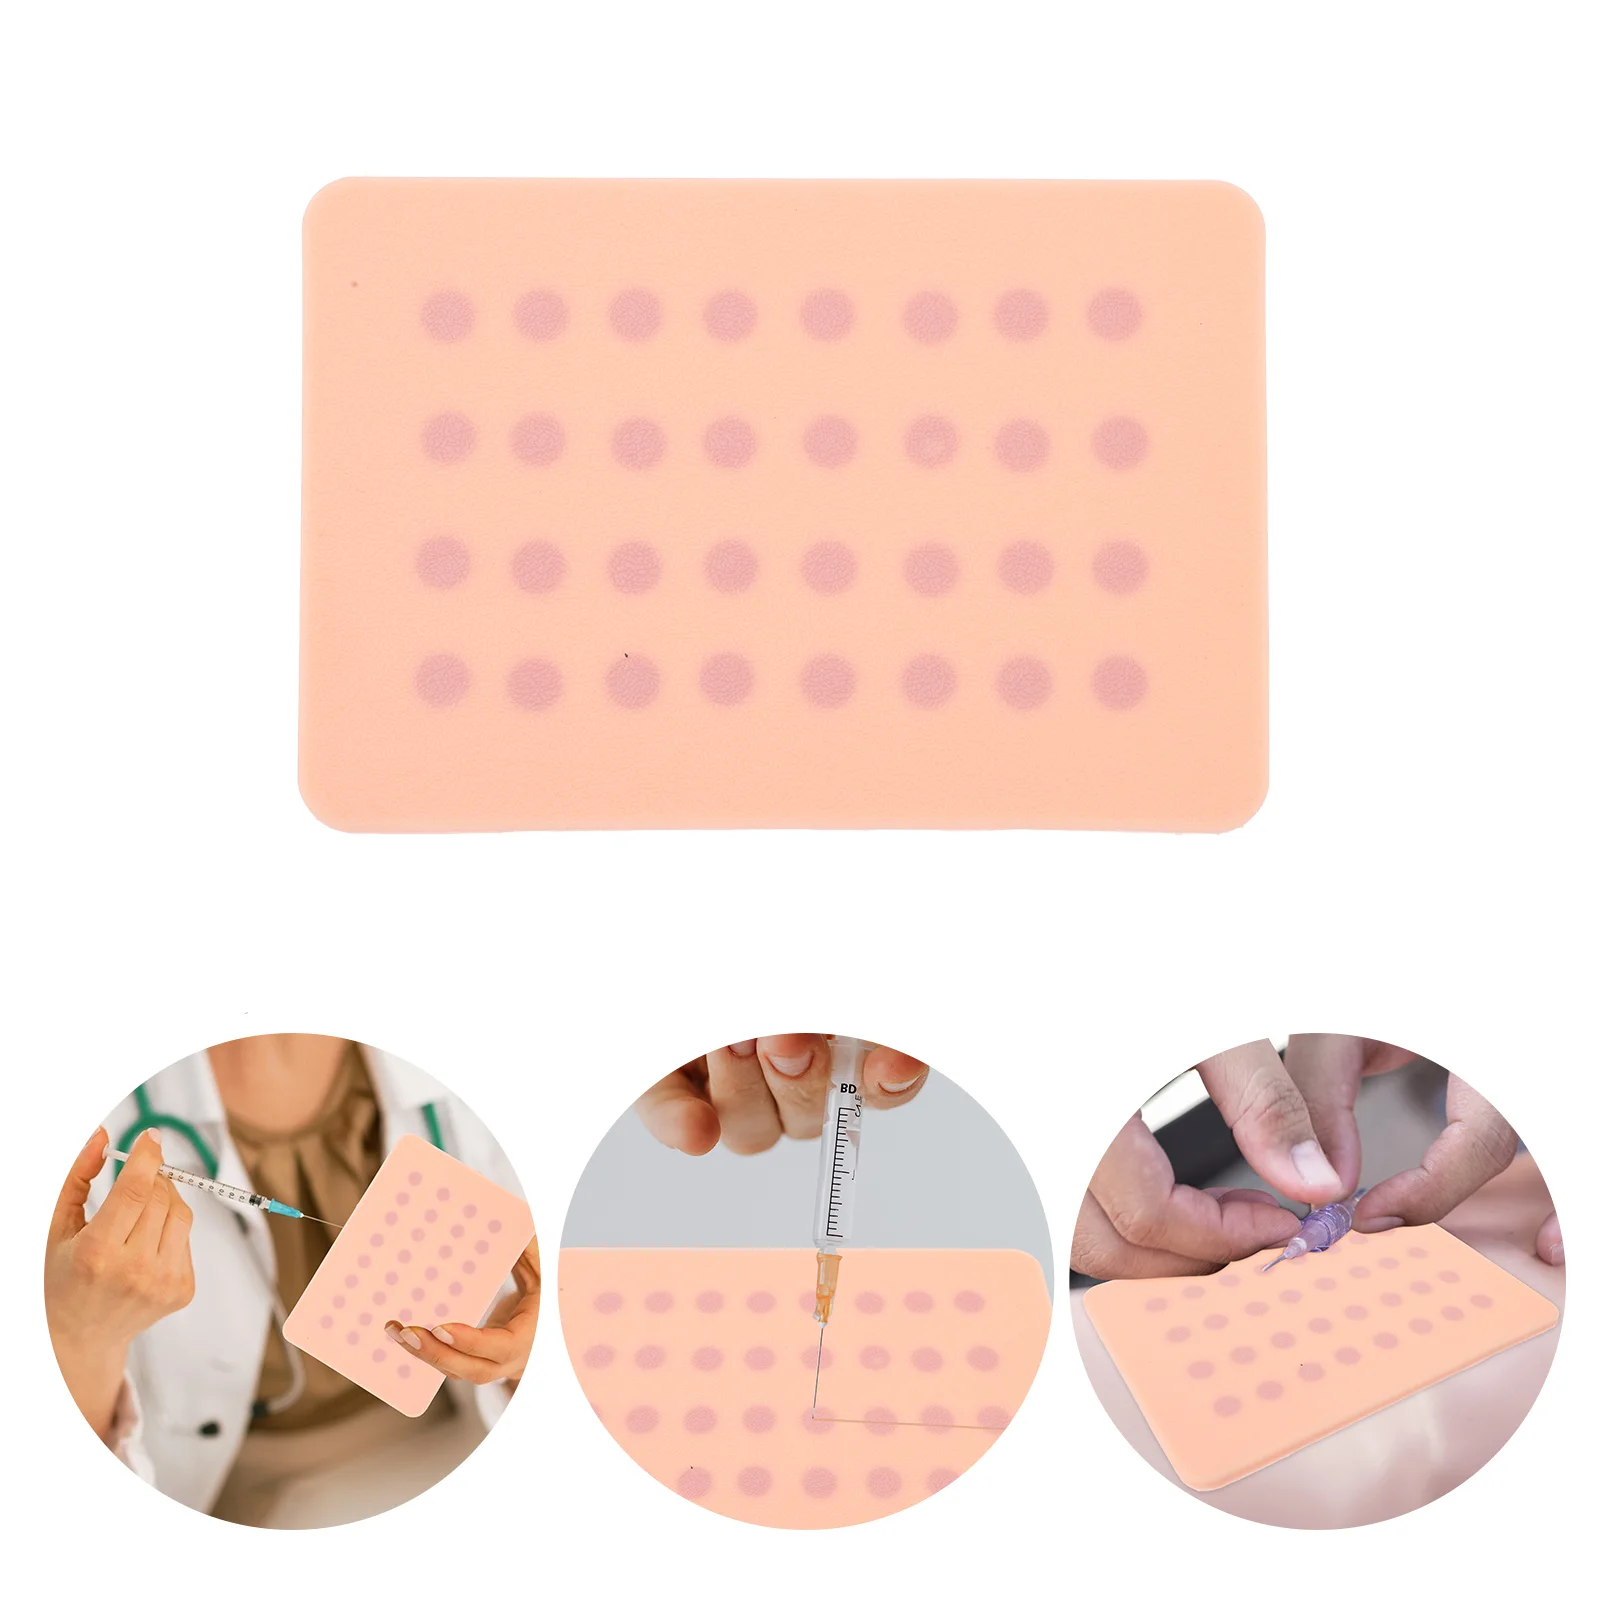 

Injection Pad Practice Training Skin Model Venipuncture Kit Human Iv Arm Artificial Phlebotomy Intradermalnurse Student Wearable